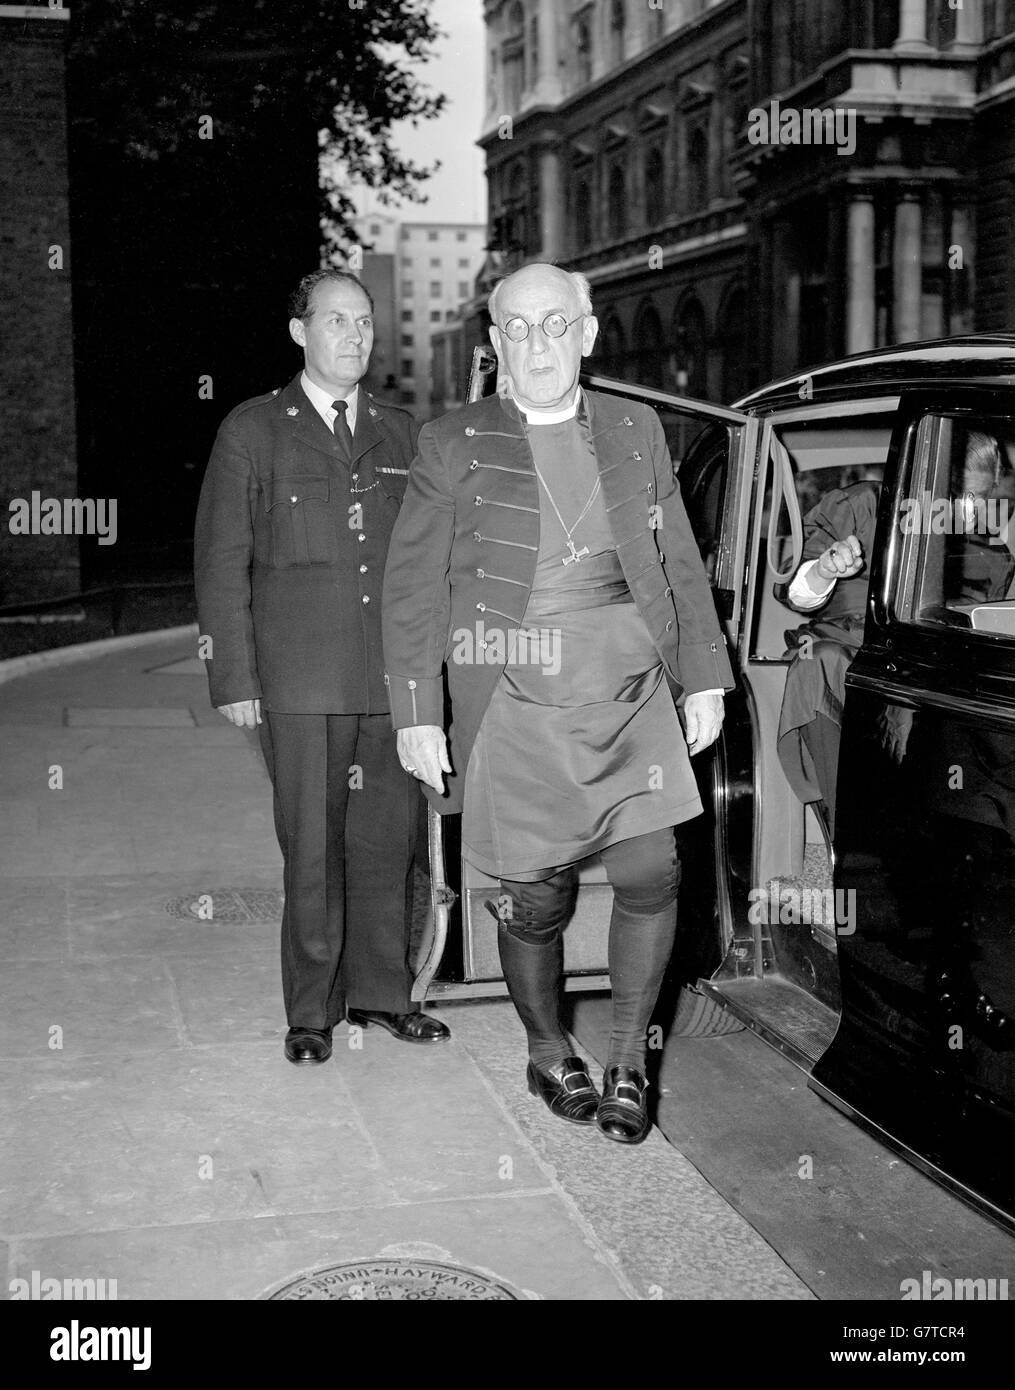 Dr. Geoffrey Fisher, the Archbishop of Canterbury, pictured as he arrives at 10 Downing Street, when 21 Archbishops and Metropolitans of the Anglican Communion who are attending the Lambeth Conference, had dinner with the Prime Minister. They were 'paired' with 21 distinguished laymen. Stock Photo